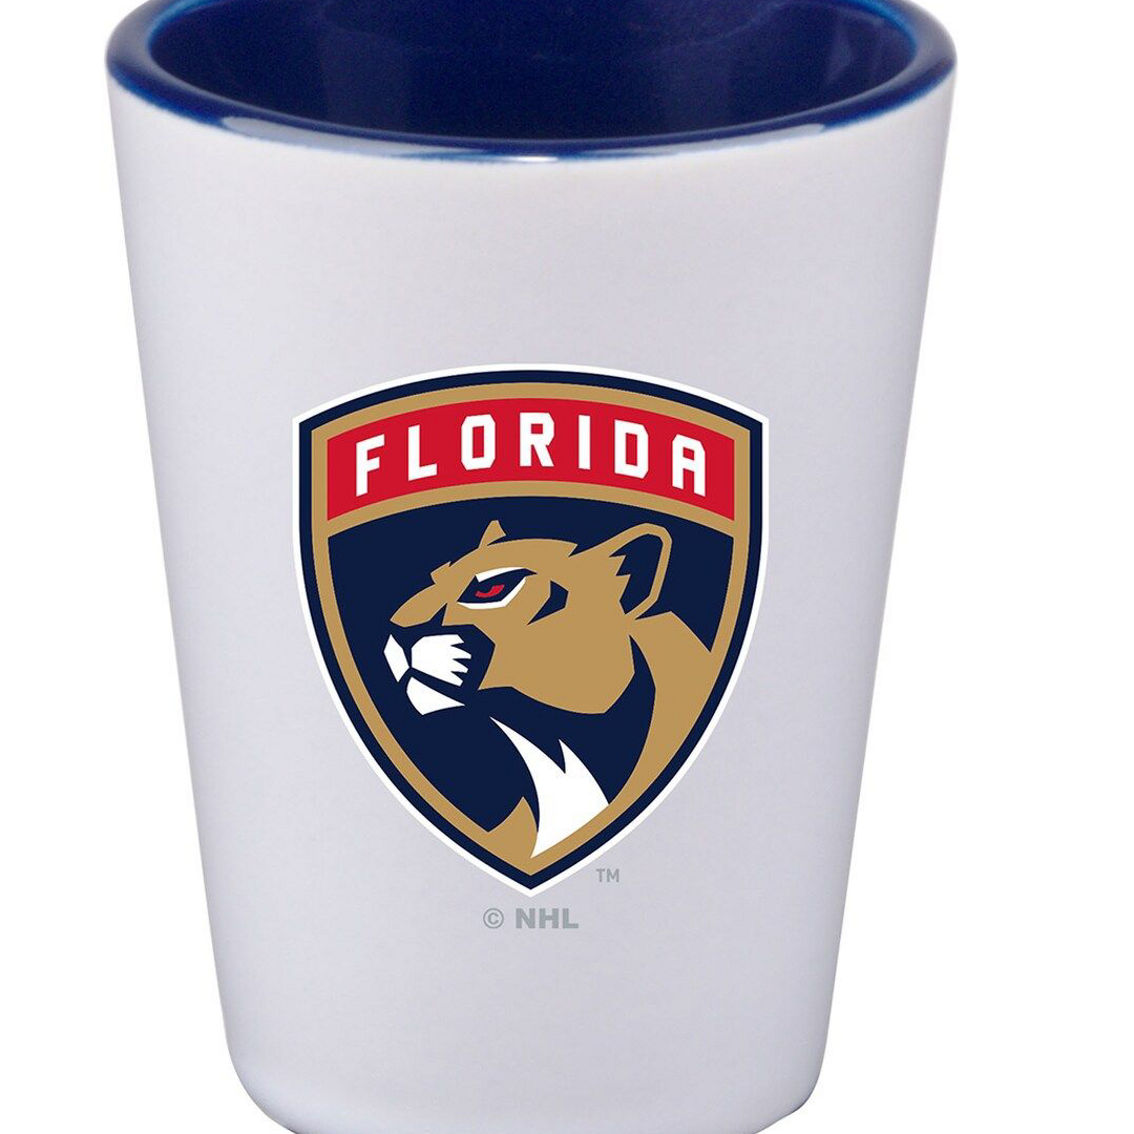 The Memory Company Florida Panthers 2oz. Inner Color Shot Glass - Image 2 of 2